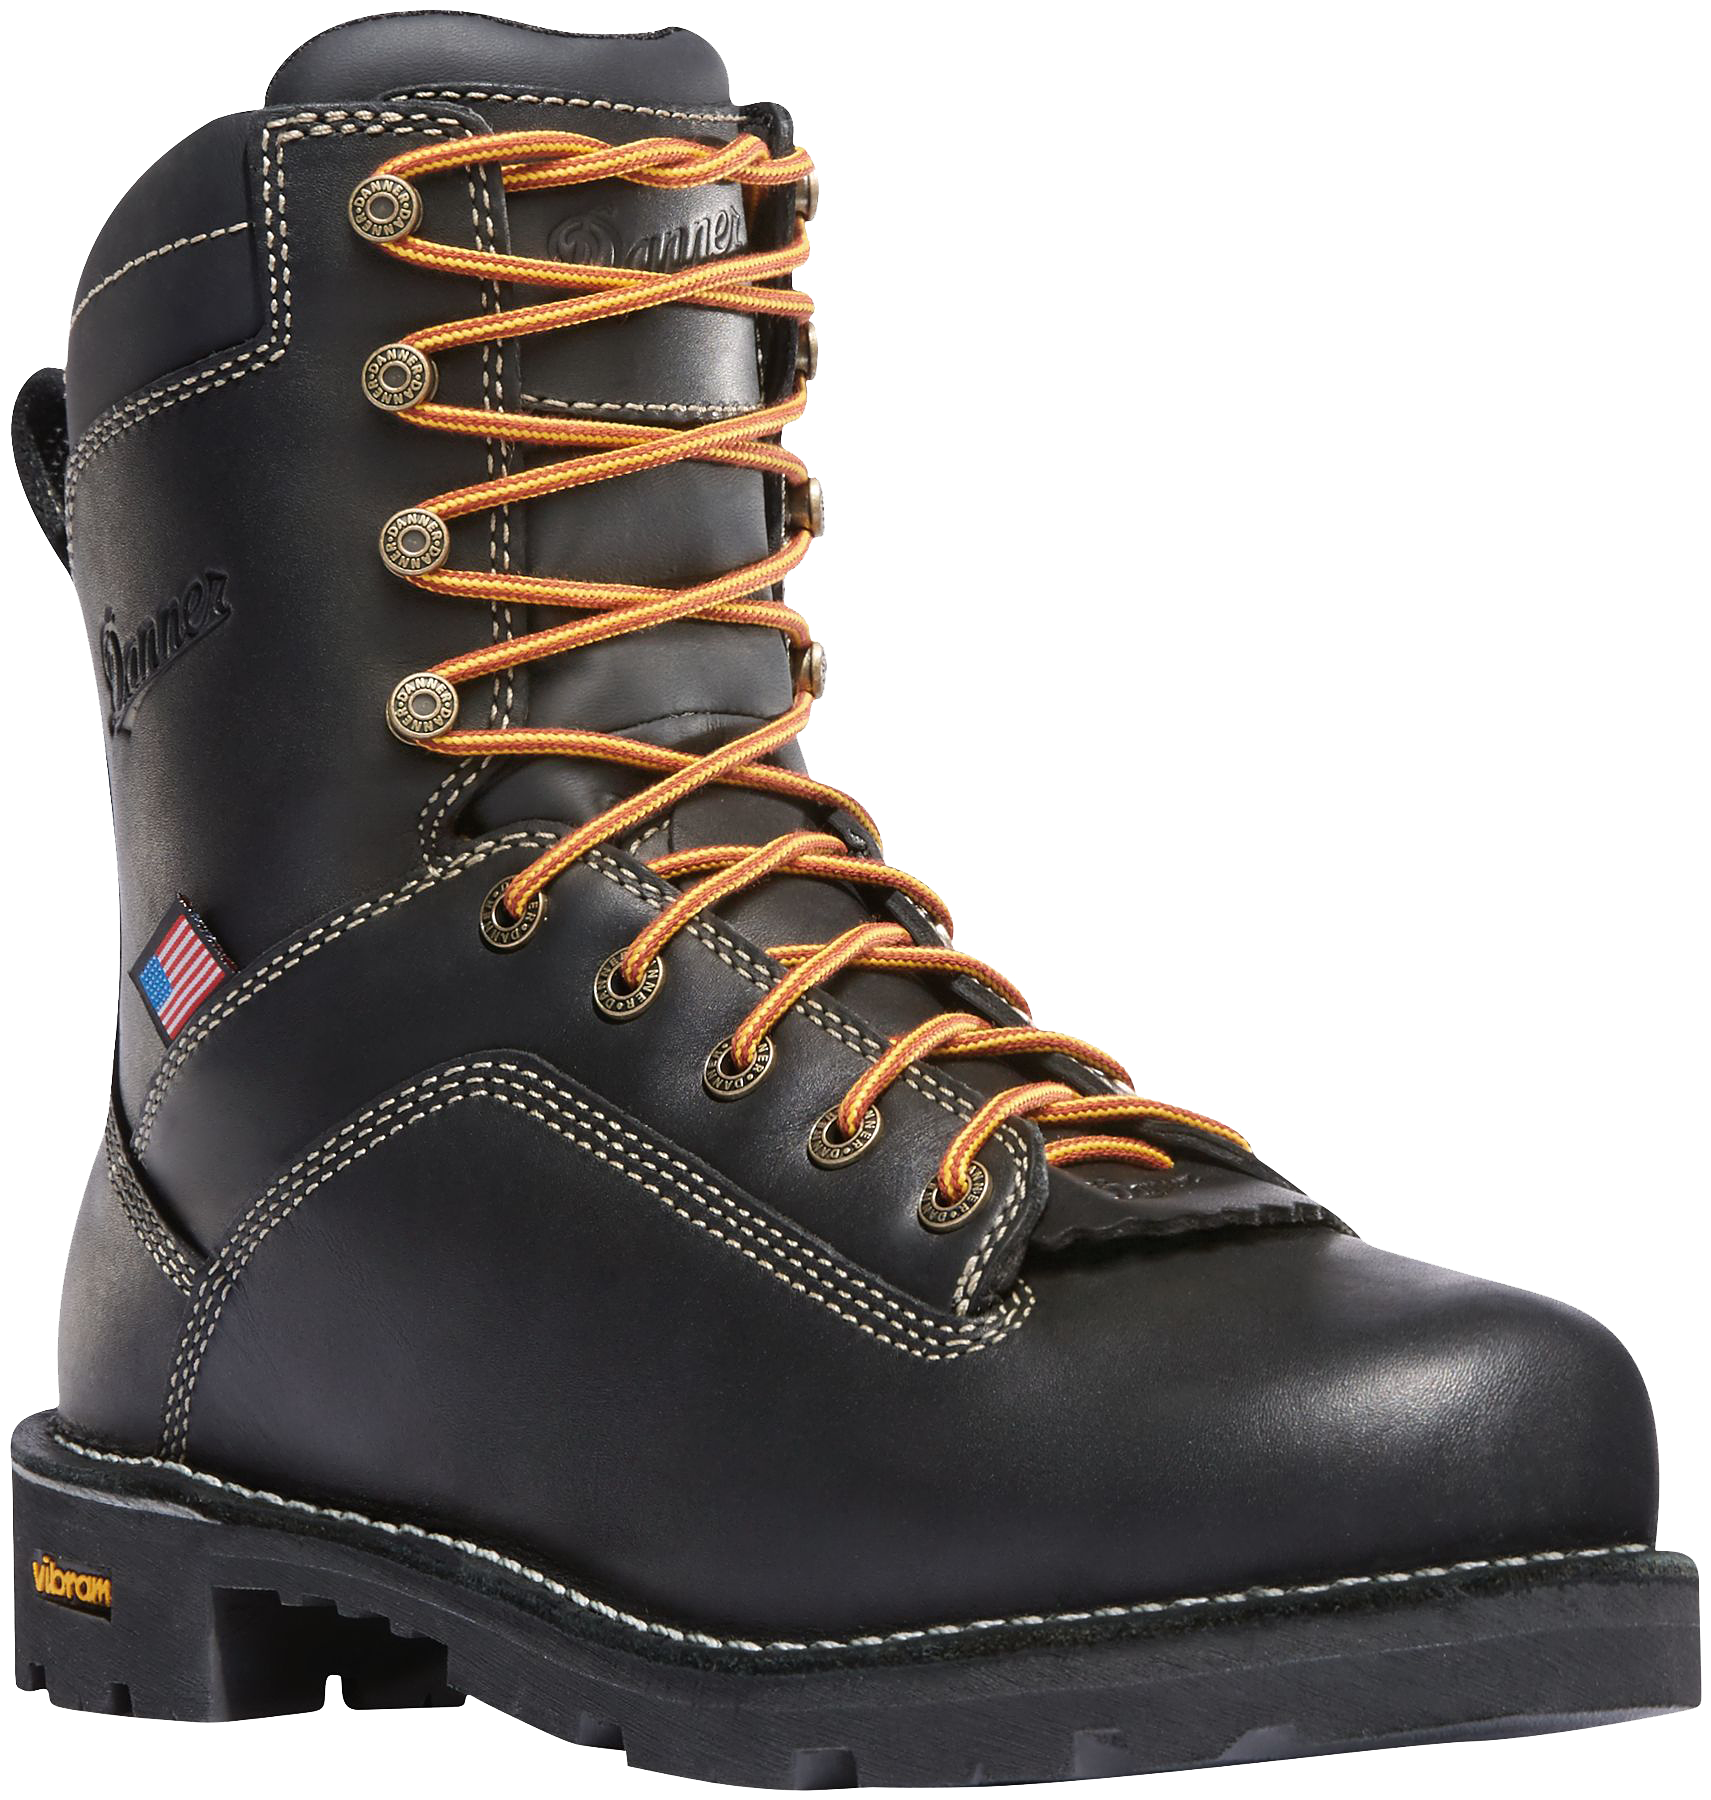 Danner Quarry USA Brown GORE-TEX Alloy Toe Work Boots for Men - Black - 8W